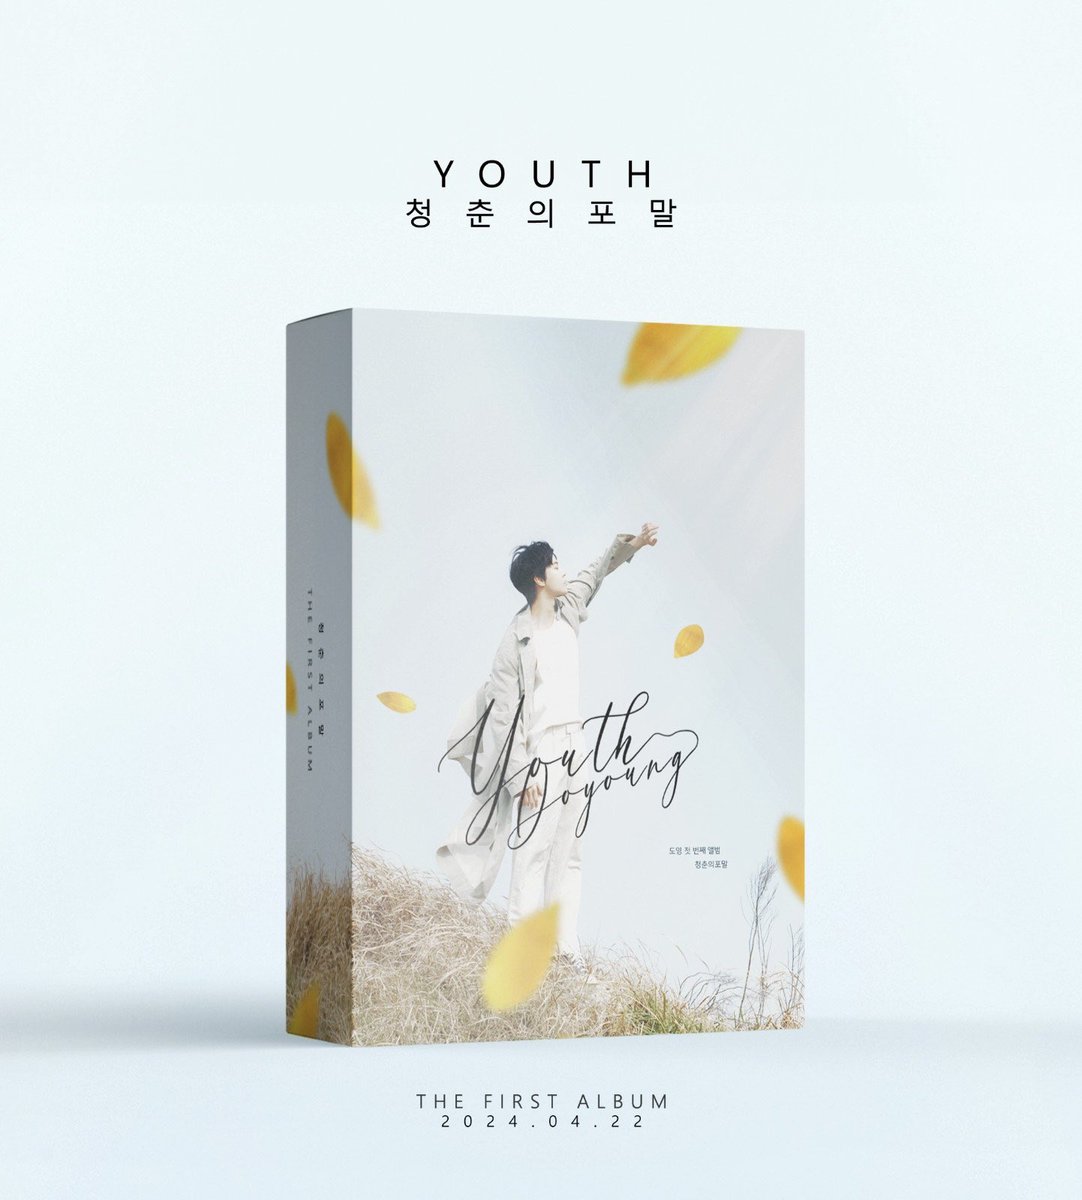 Doyoung - 청춘의포말 (YOUTH) 🌼🩵!
OUTBOX COVER DESIGN .